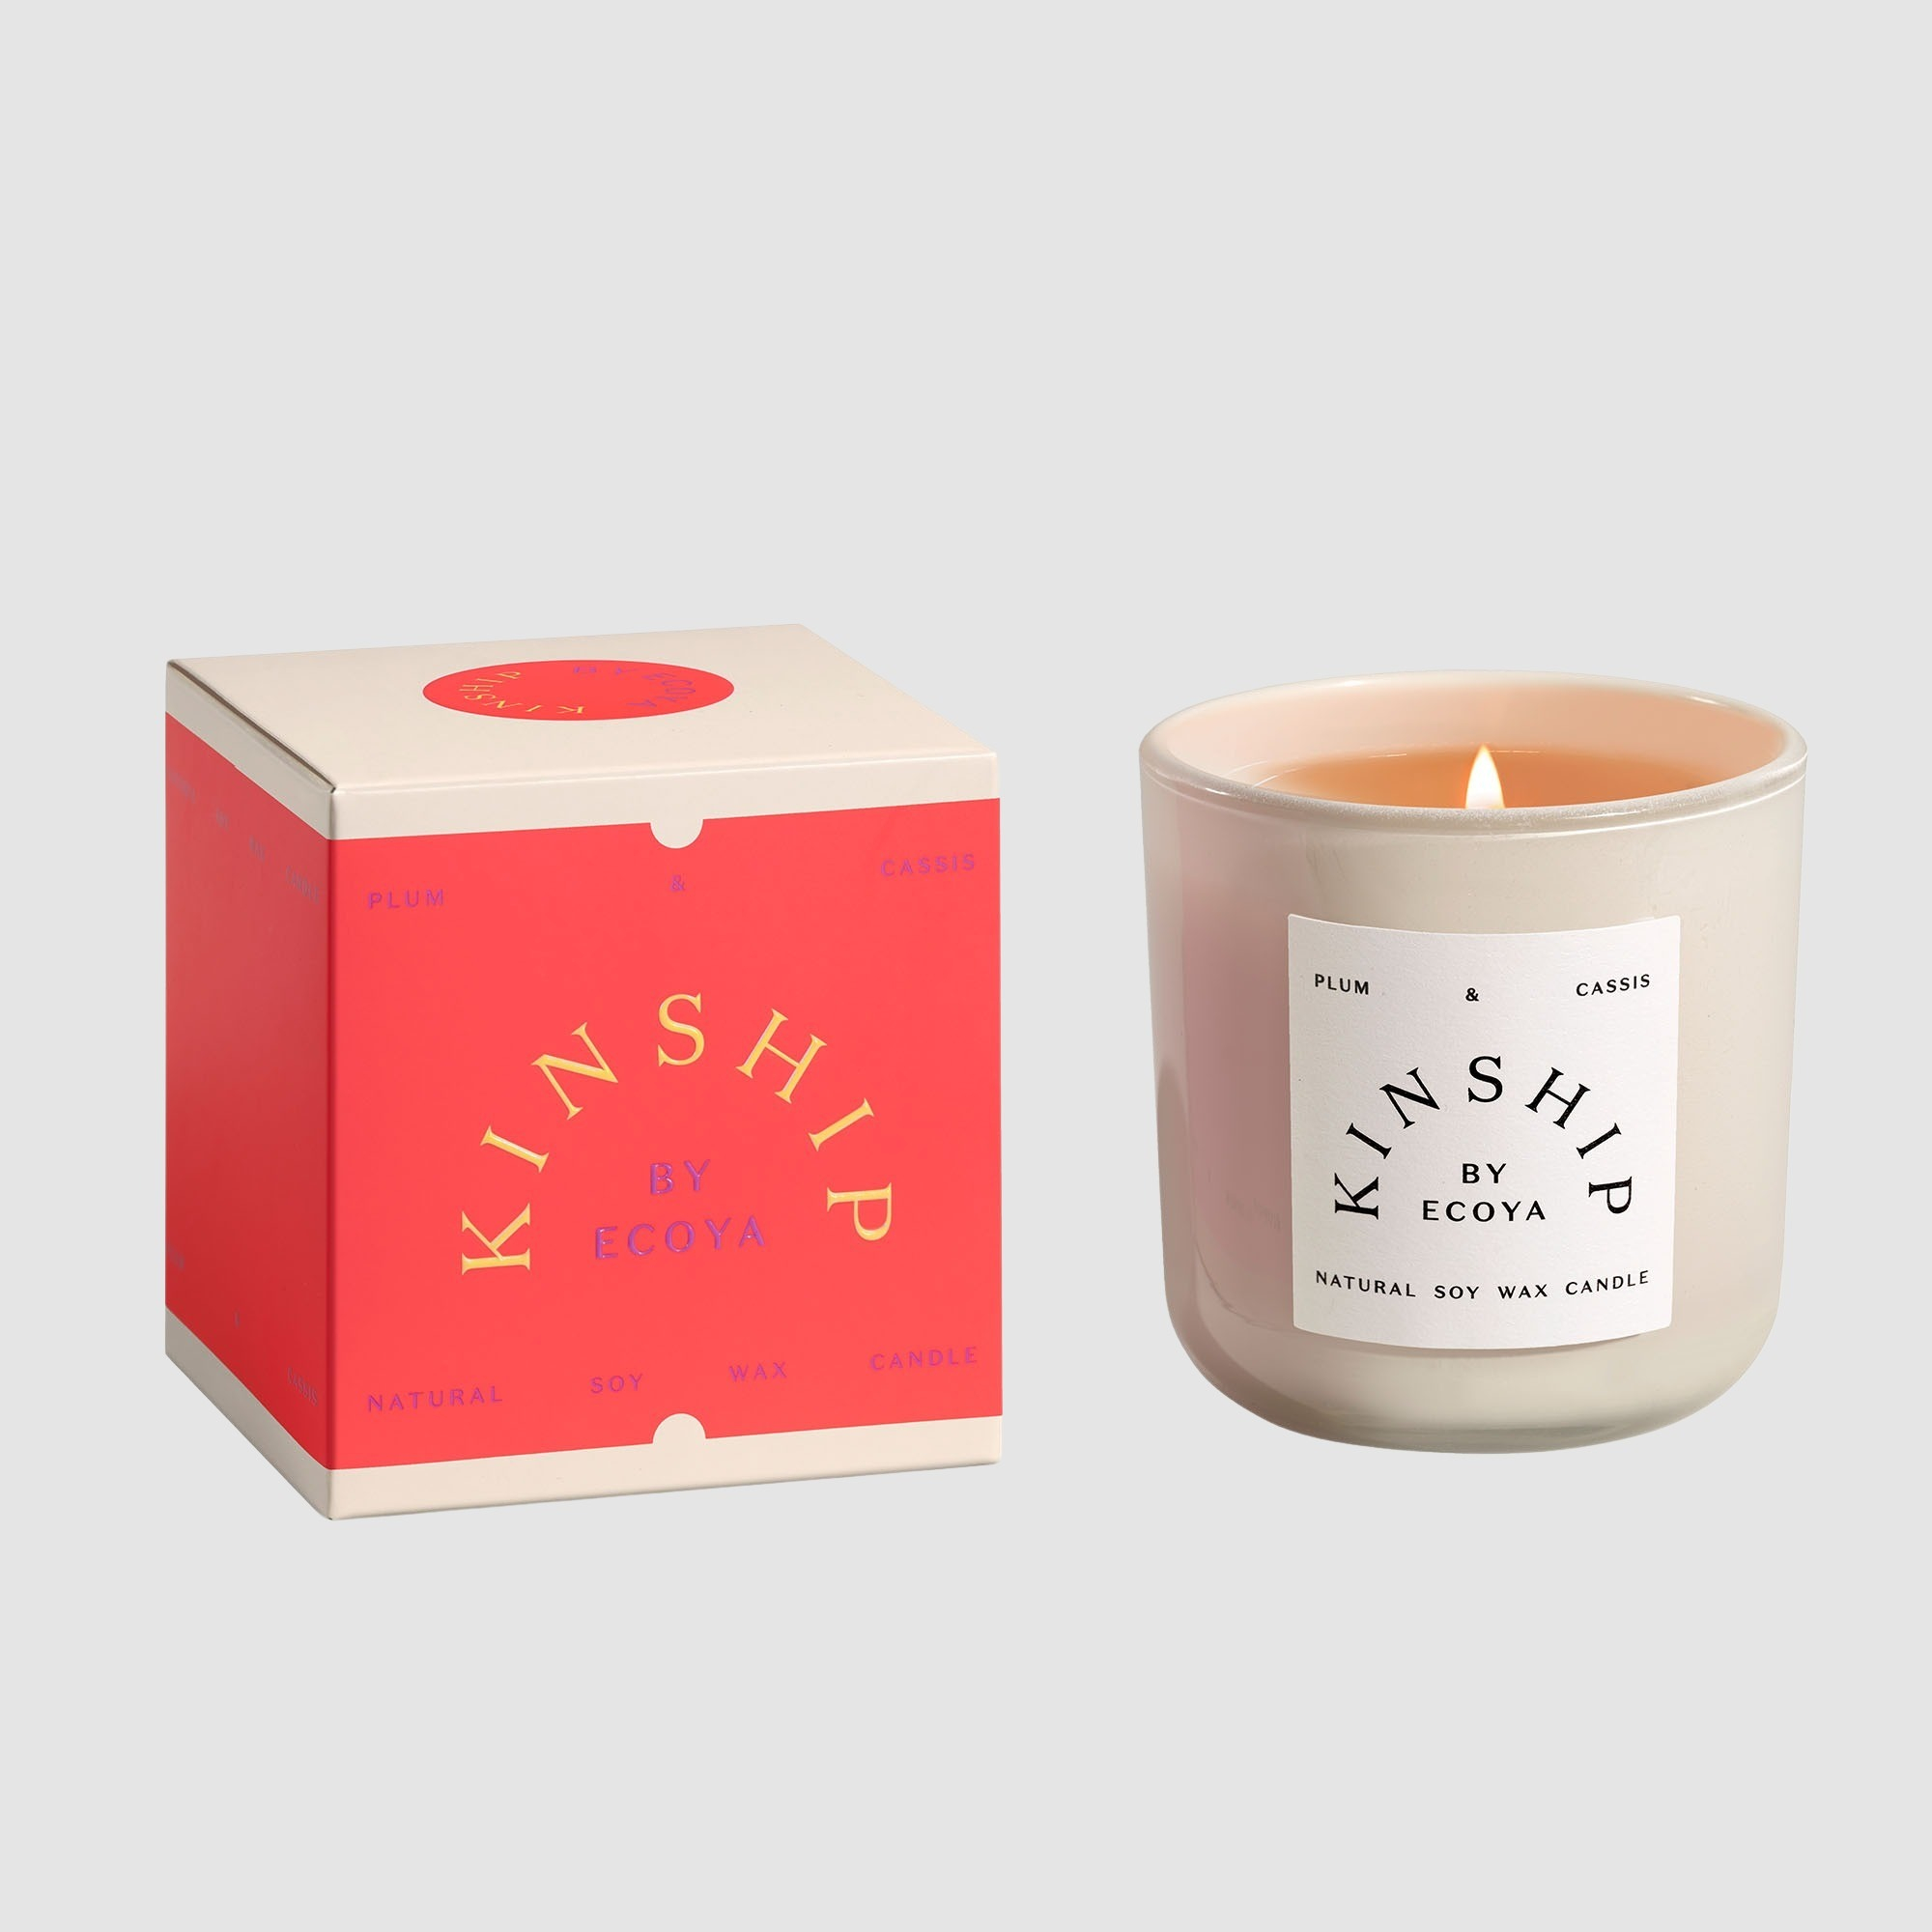 Kinship by Ecoya Plum & Cassis Candle 375g